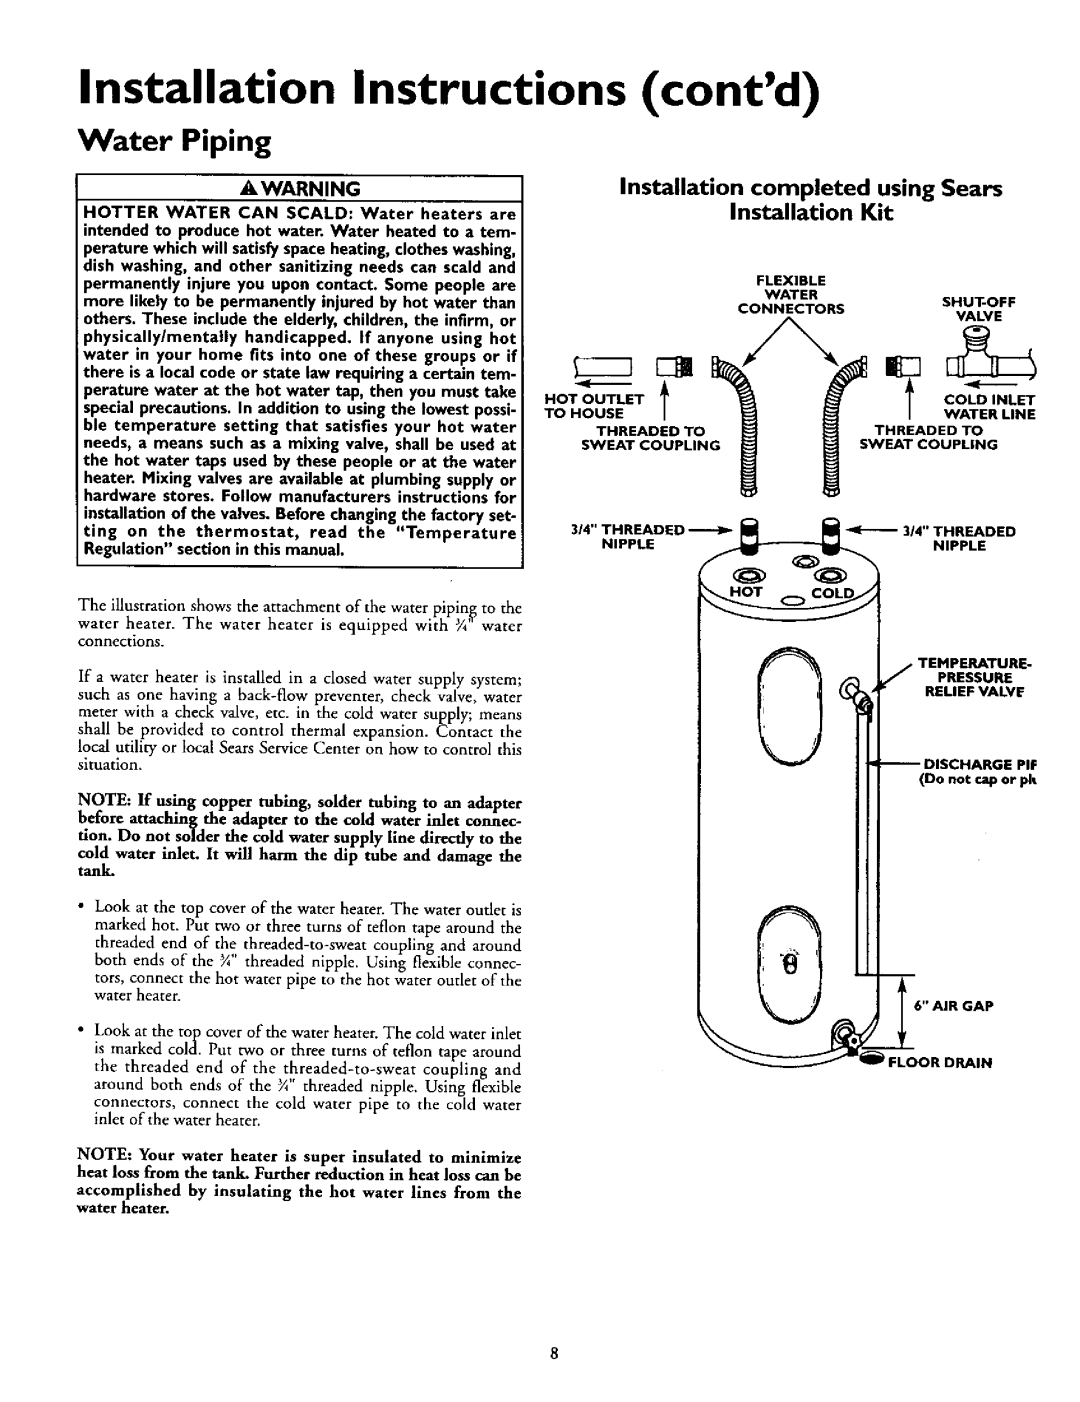 Kenmore 153.320692 HT Water Piping, Installation completed using Sears, Installation Kit, Installation Instructions contd 